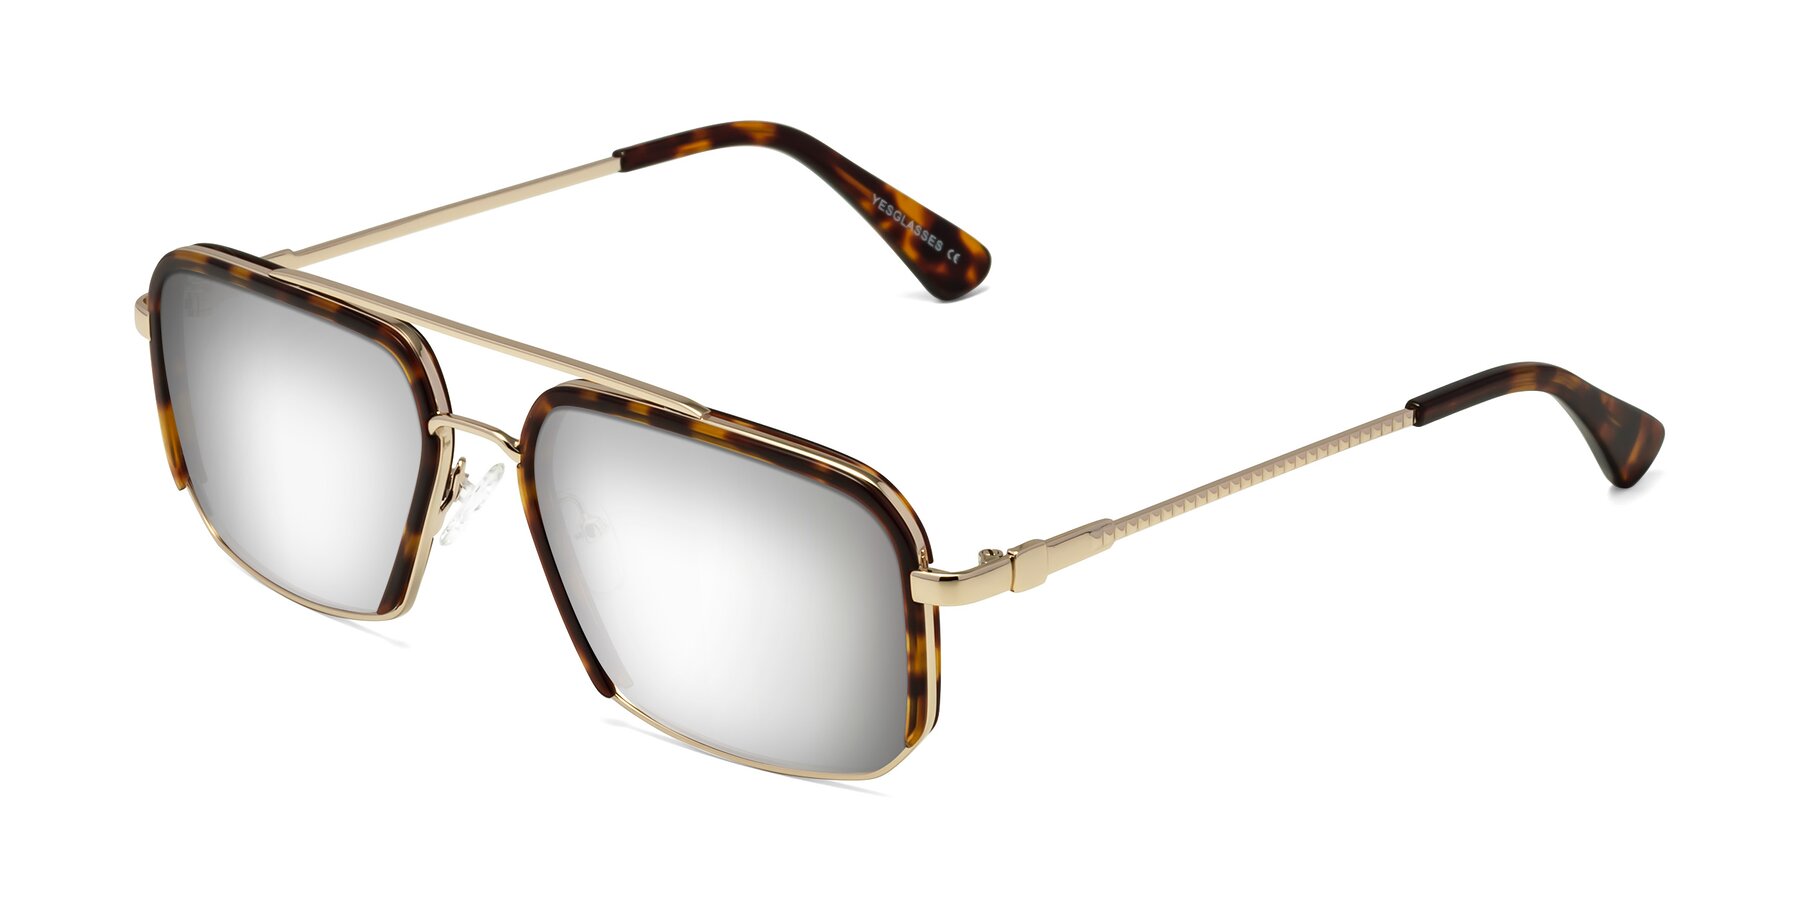 Angle of Dechter in Tortoise-Gold with Silver Mirrored Lenses